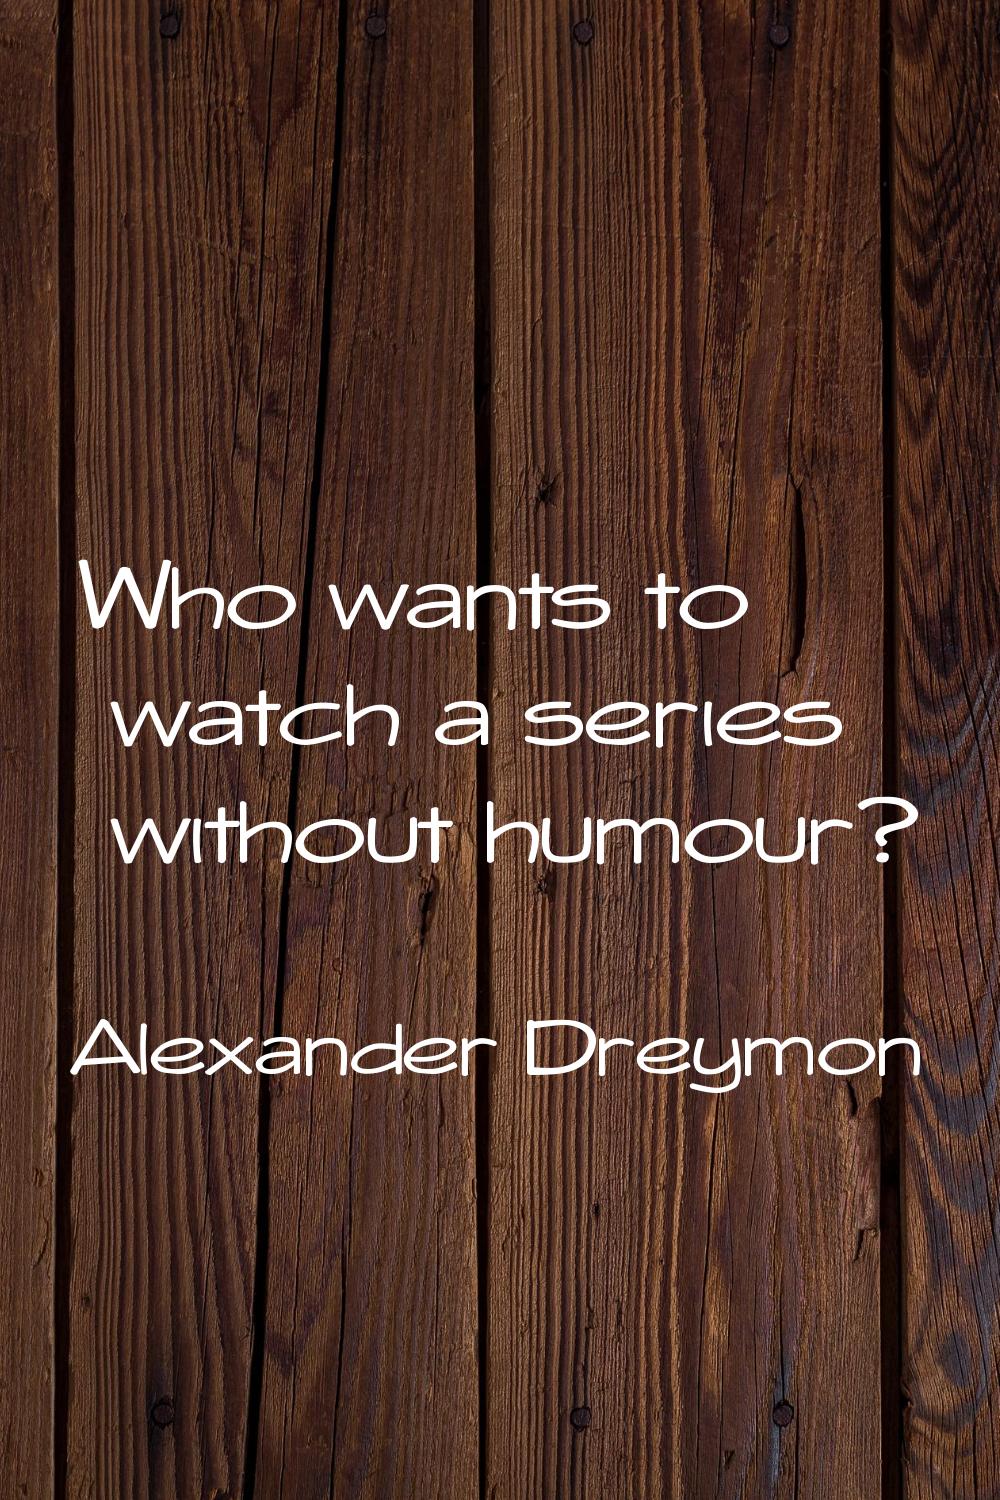 Who wants to watch a series without humour?